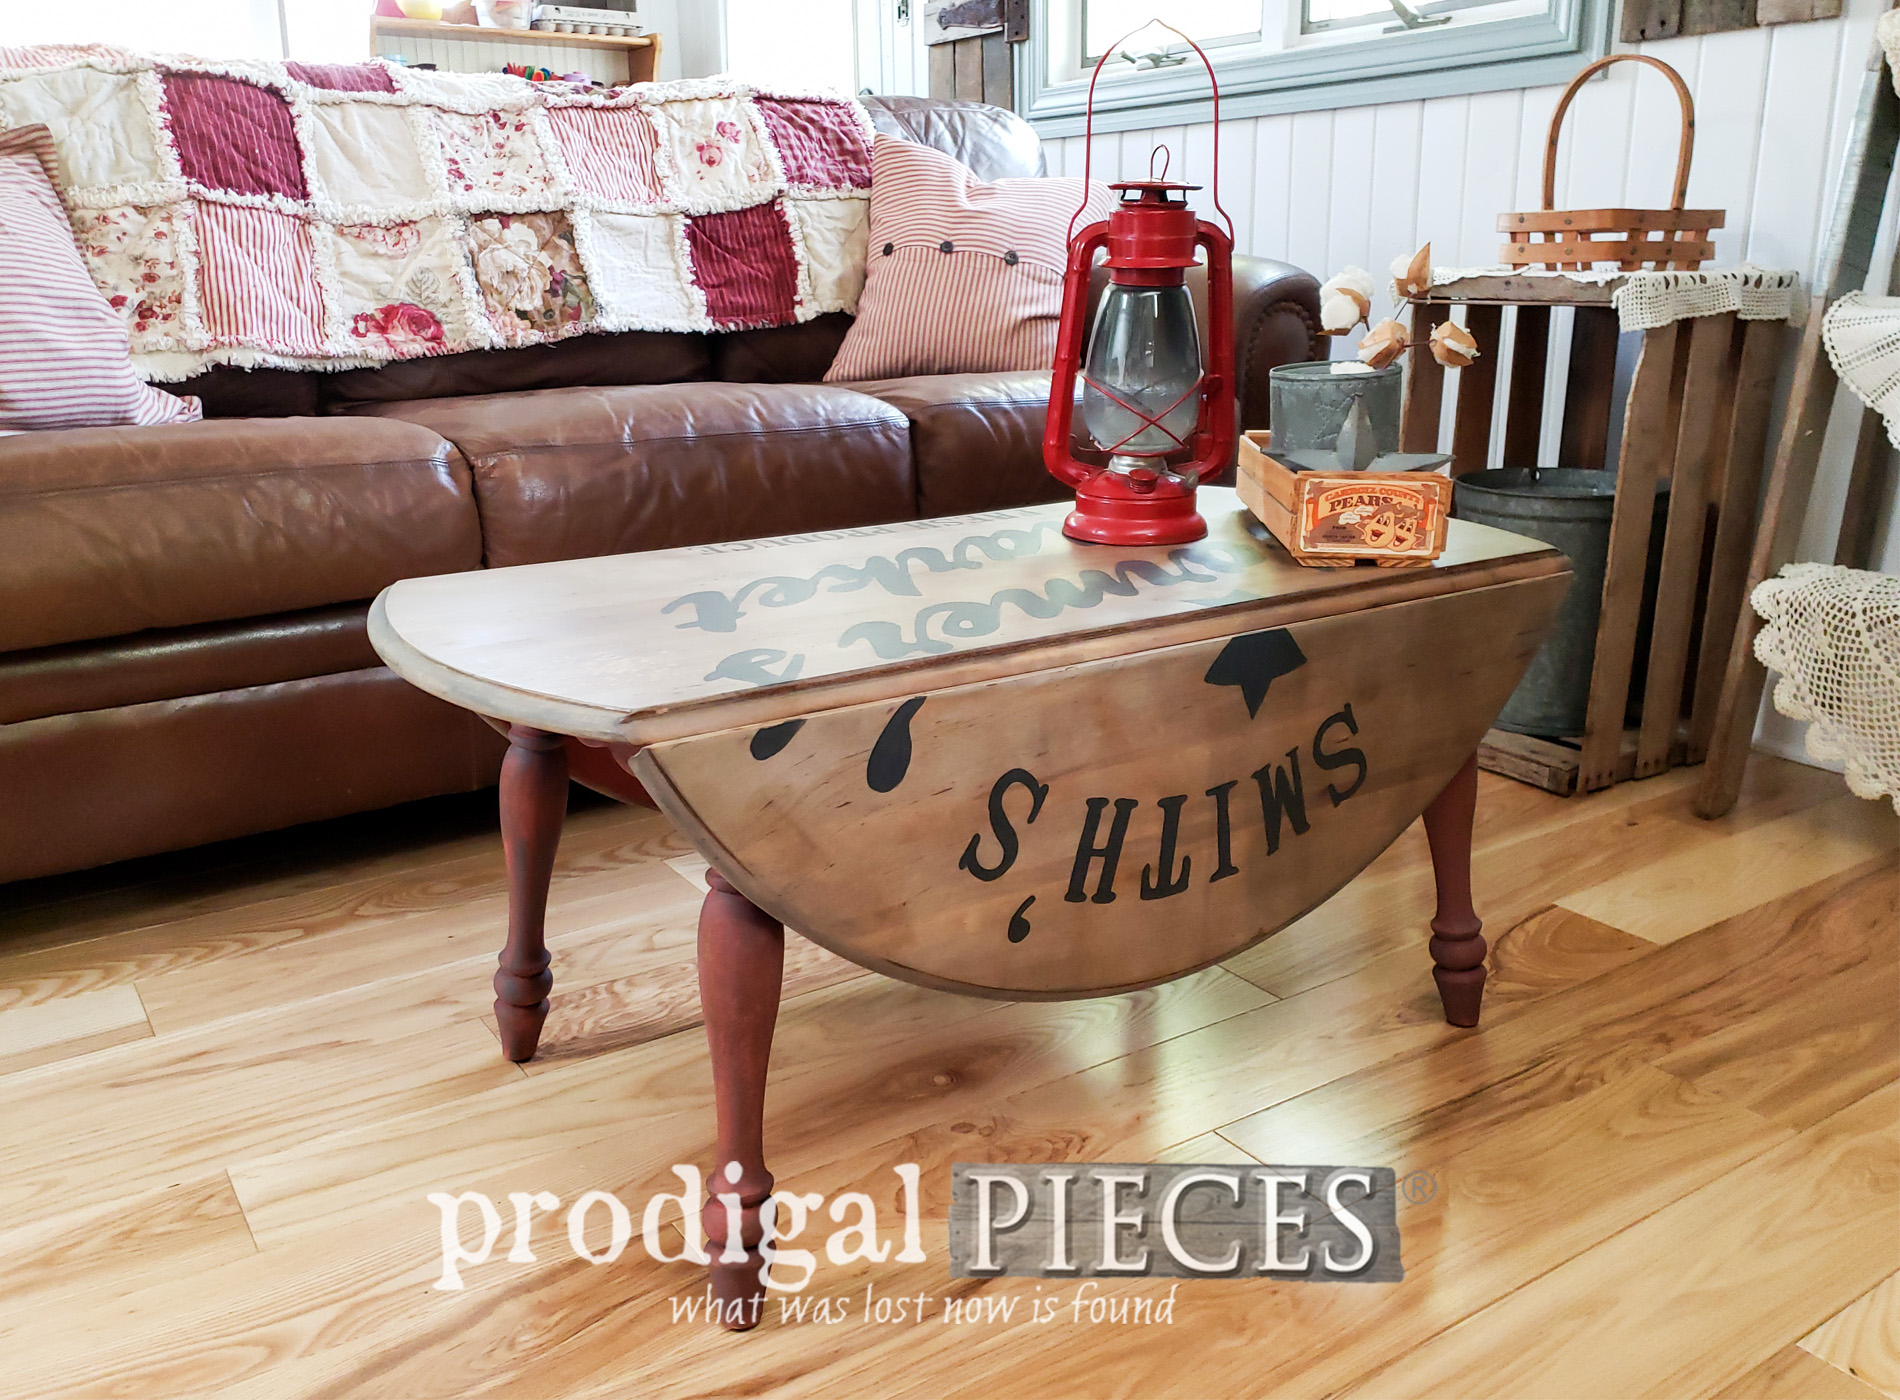 Featured Farmhouse Drop-Leaf CoffeeTable Found Curbside & Renewed by Larissa of Prodigal Pieces | prodigalpieces.com #prodigalpieces #diy #home #homedecor #furniture #farmhouse